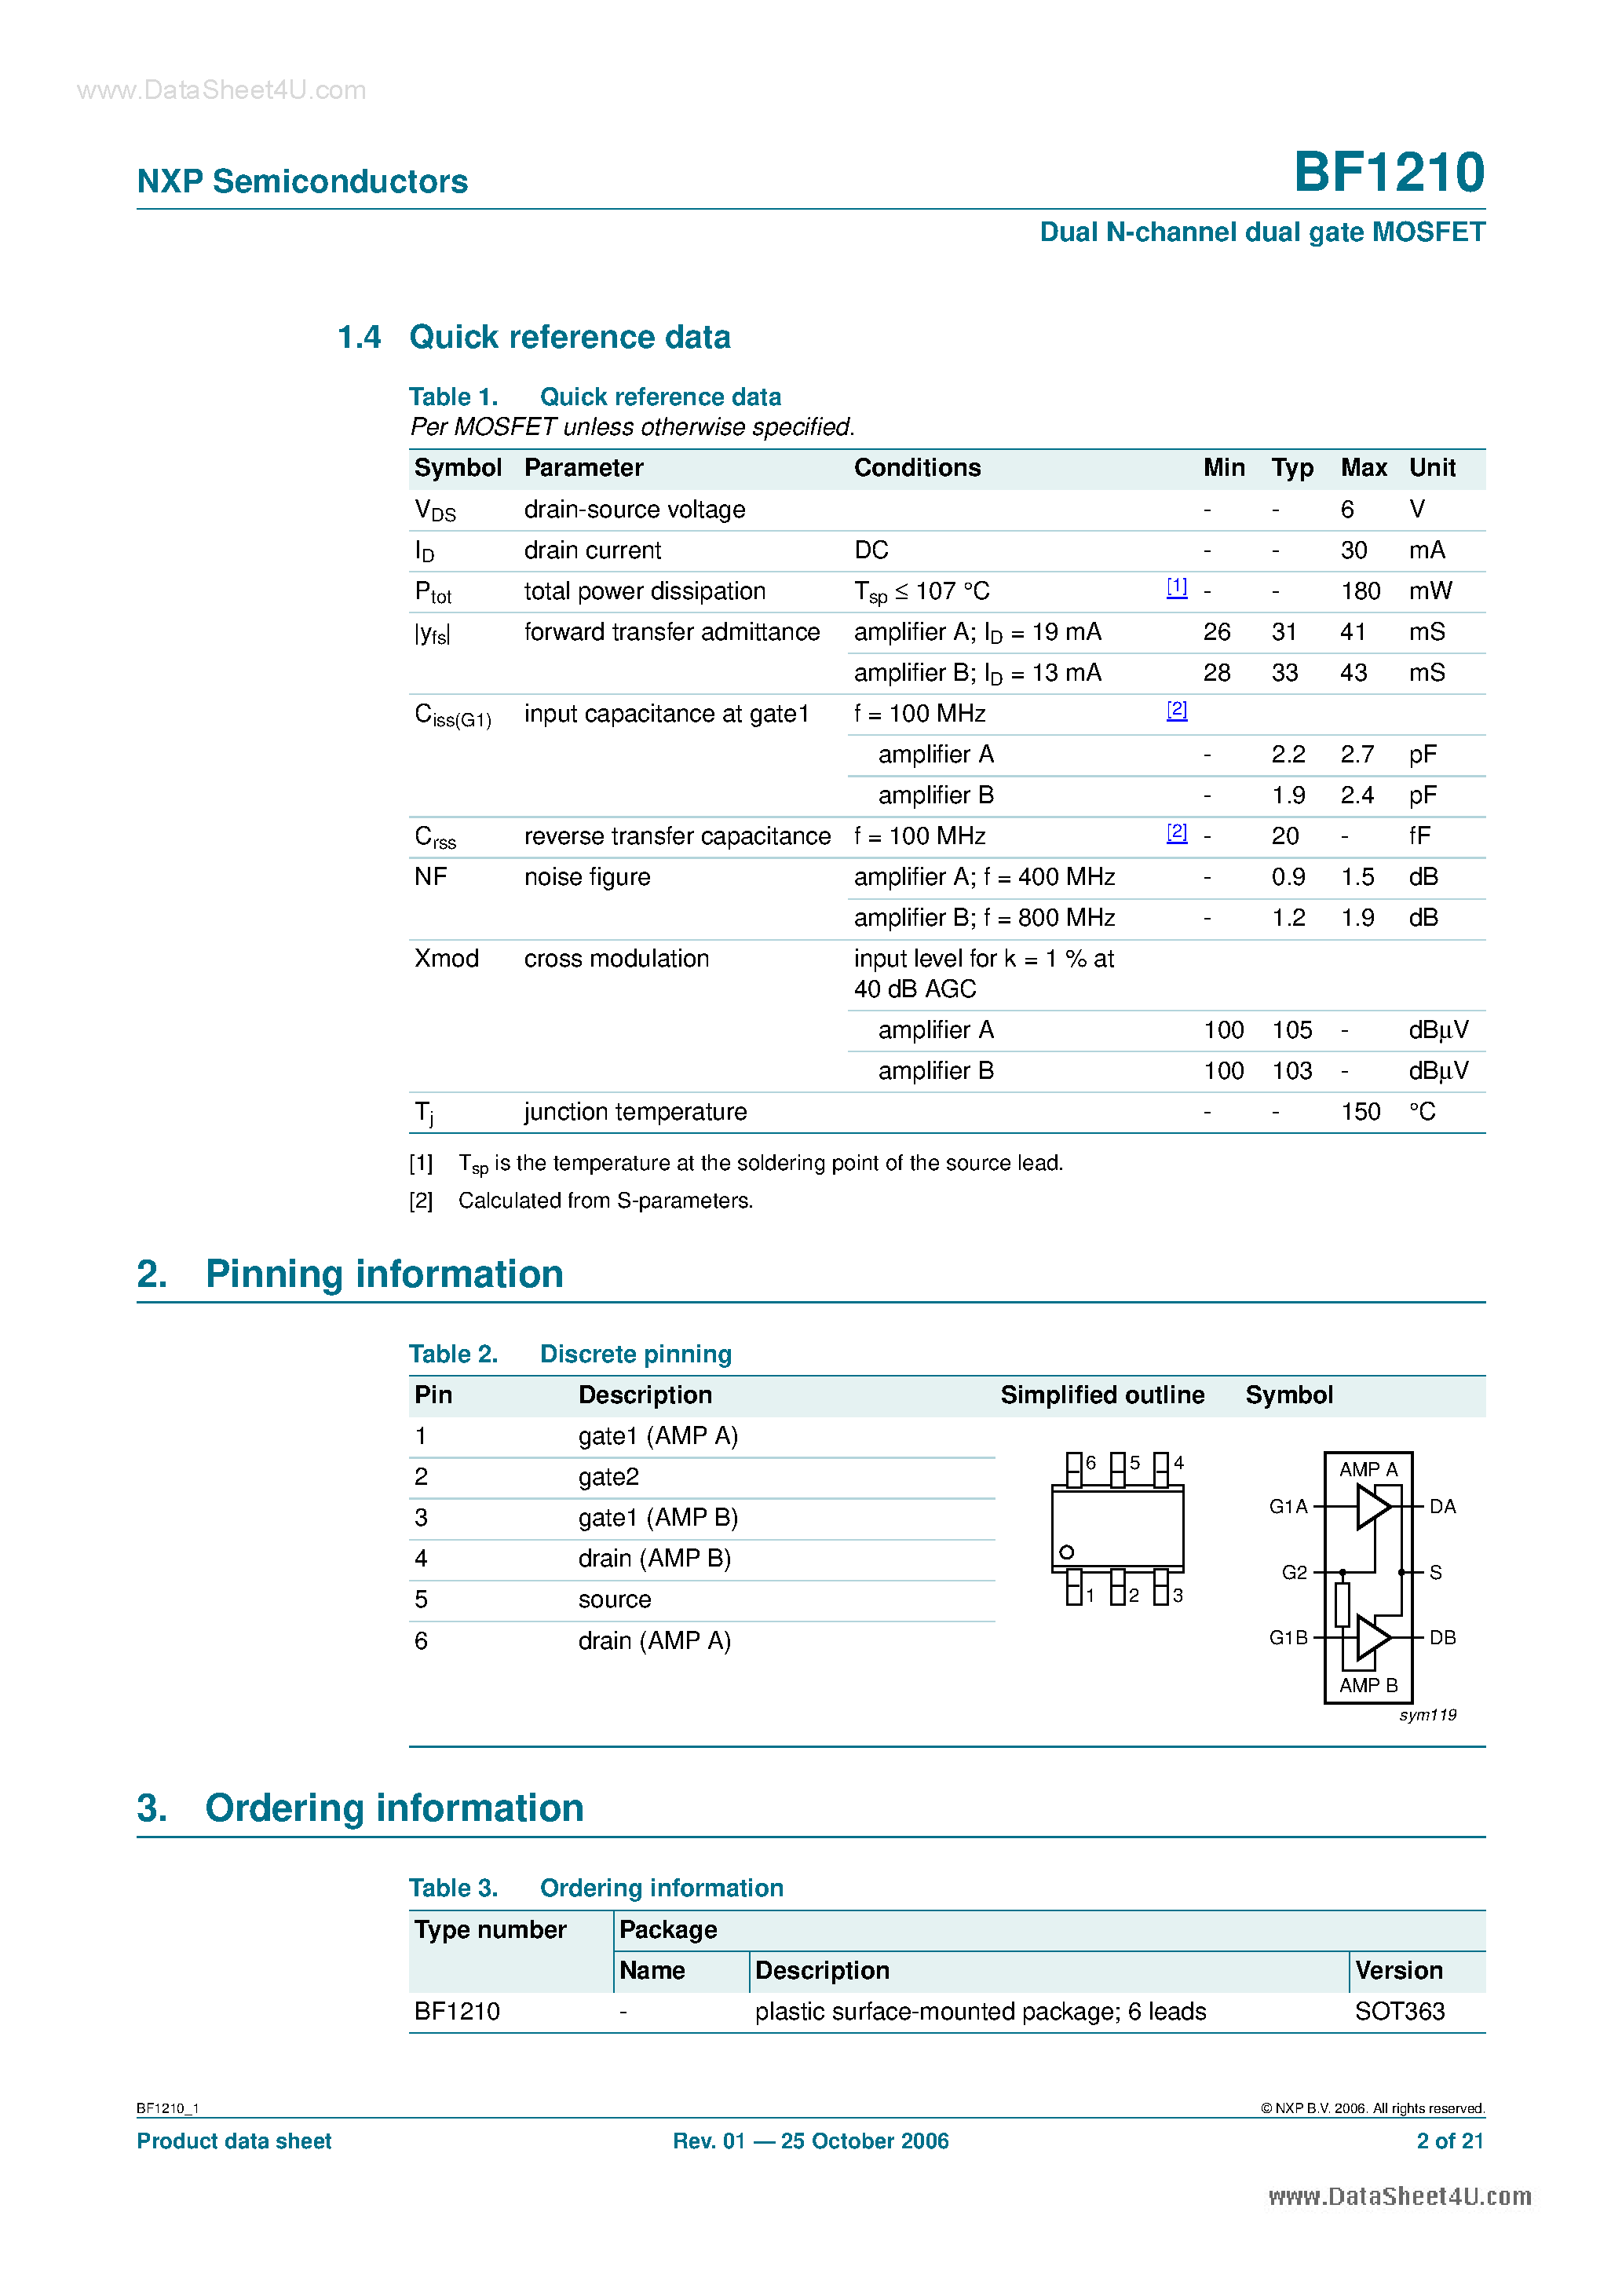 Datasheet BF1210 - Dual N-channel dual gate MOSFET page 2